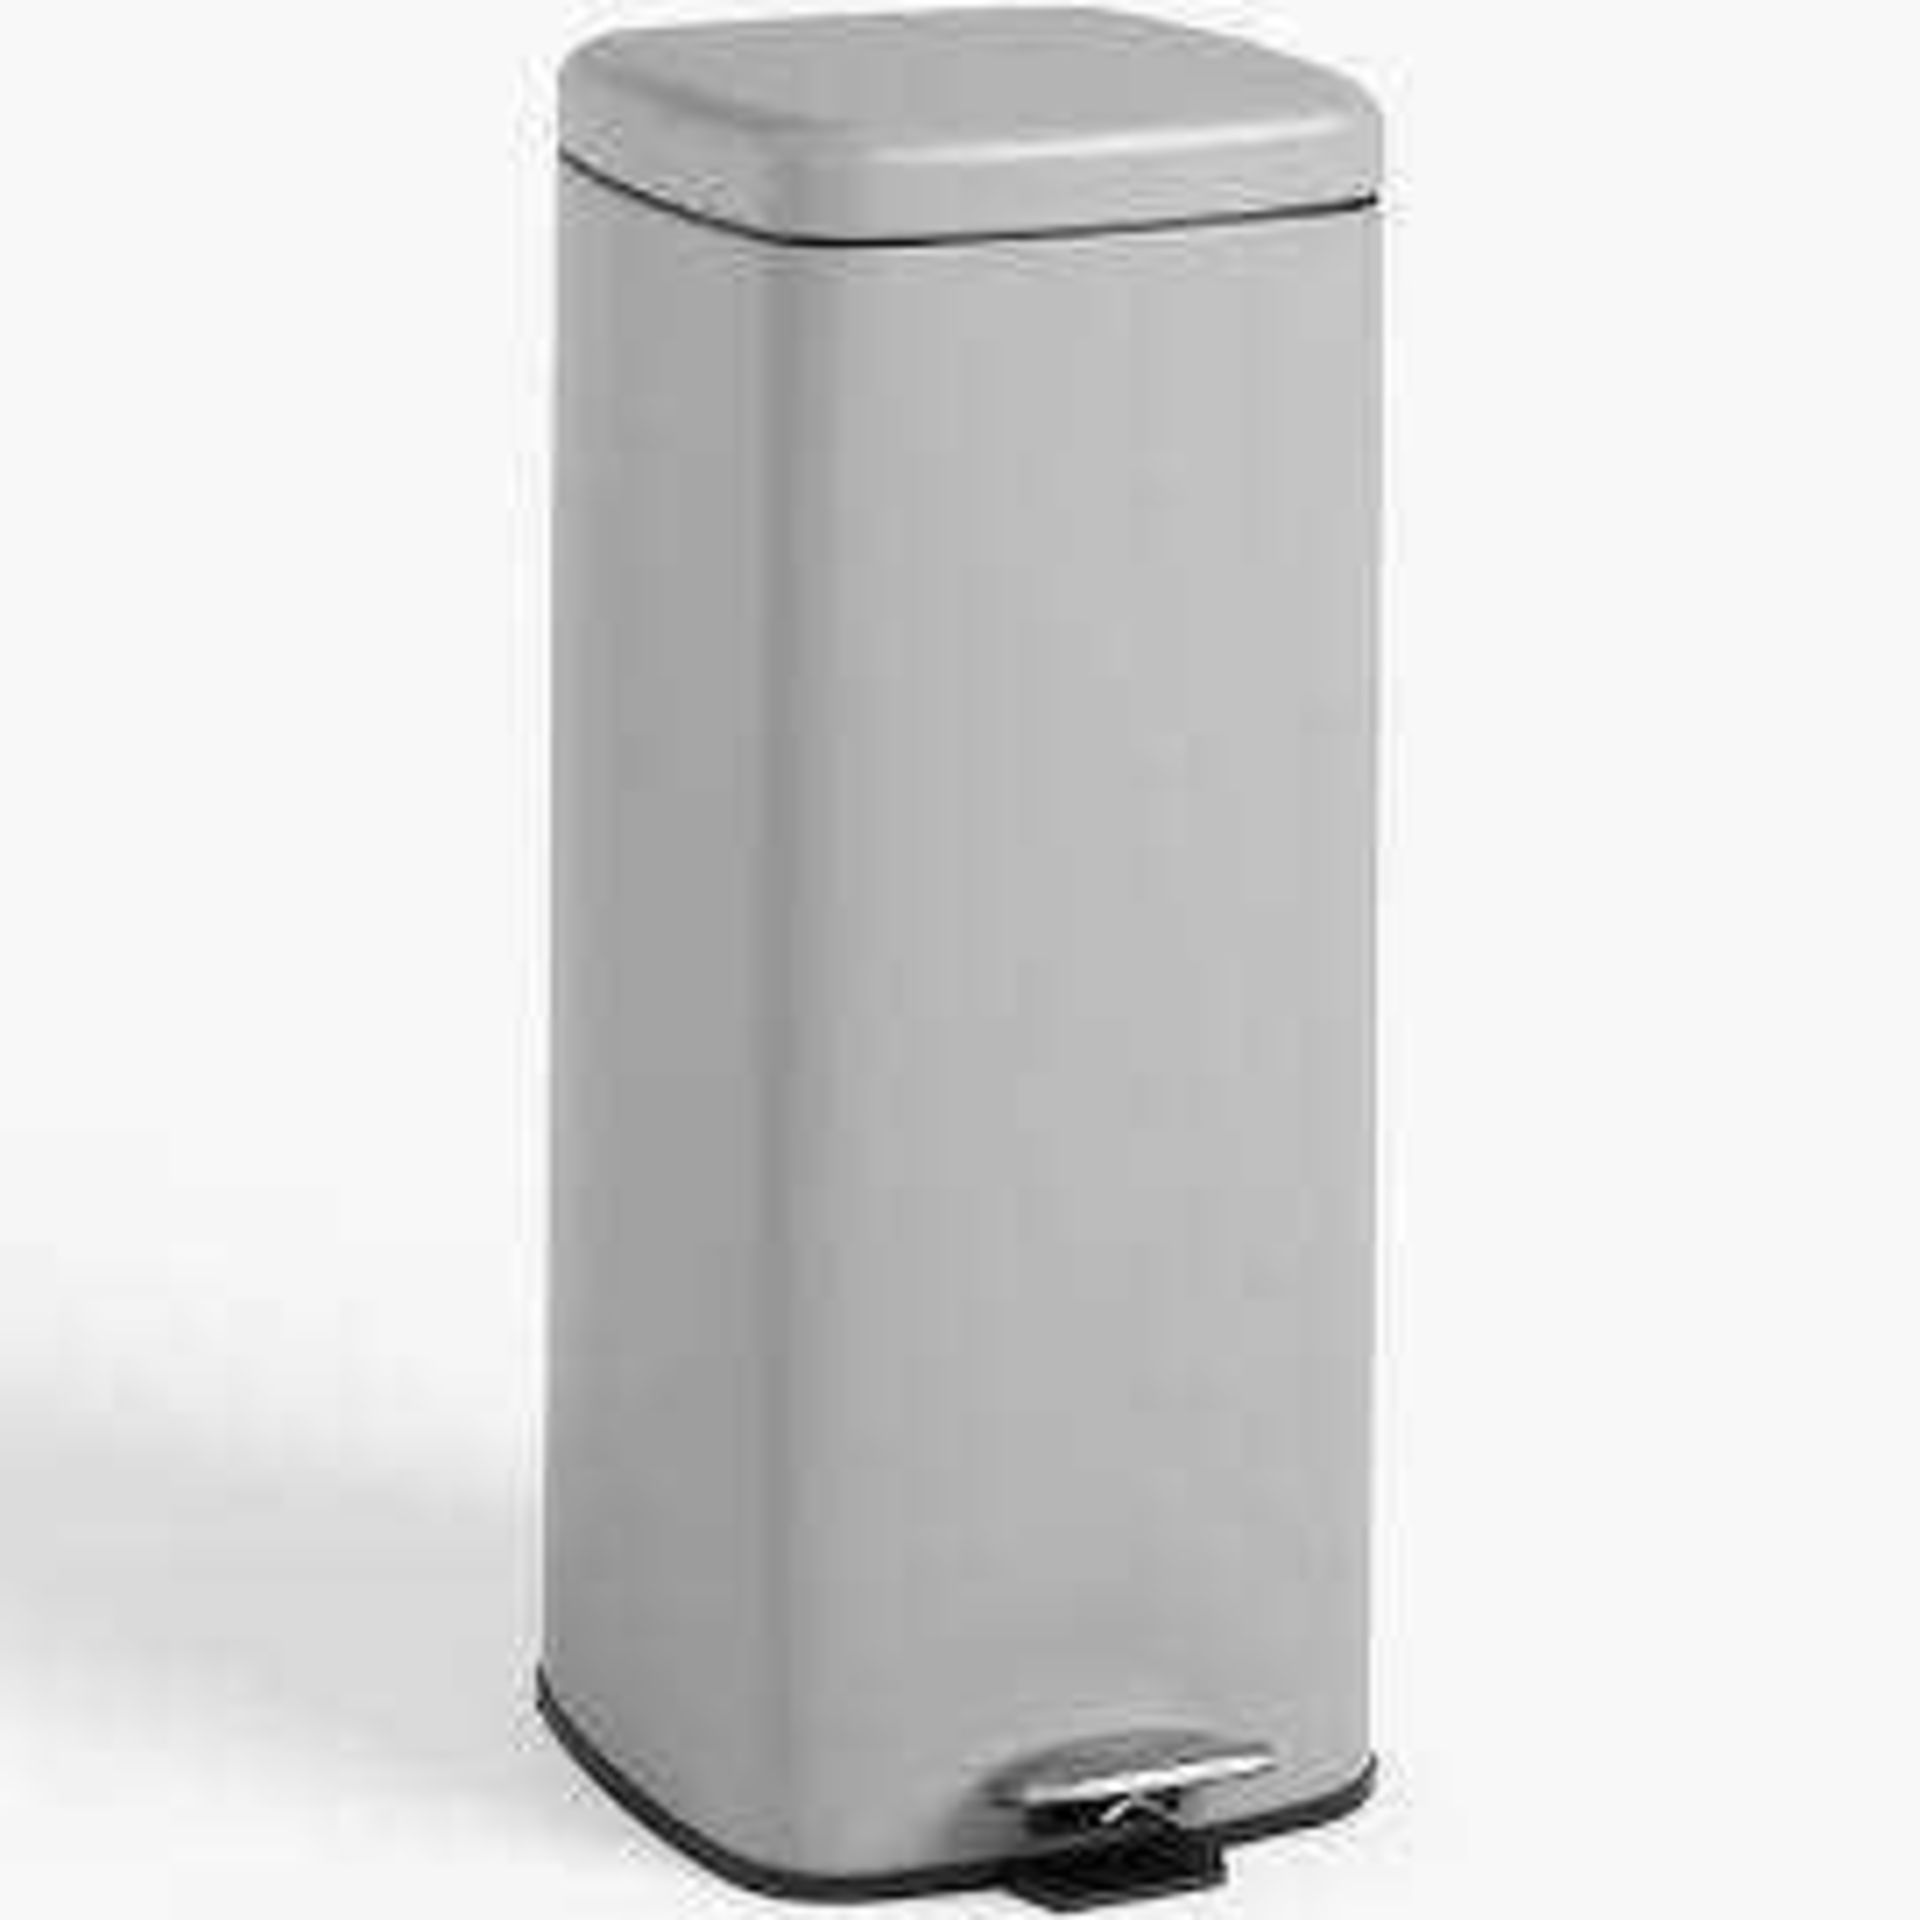 Combined RRP £140. 3 John Lewis Bins (2 Pedal And 1 Touch)